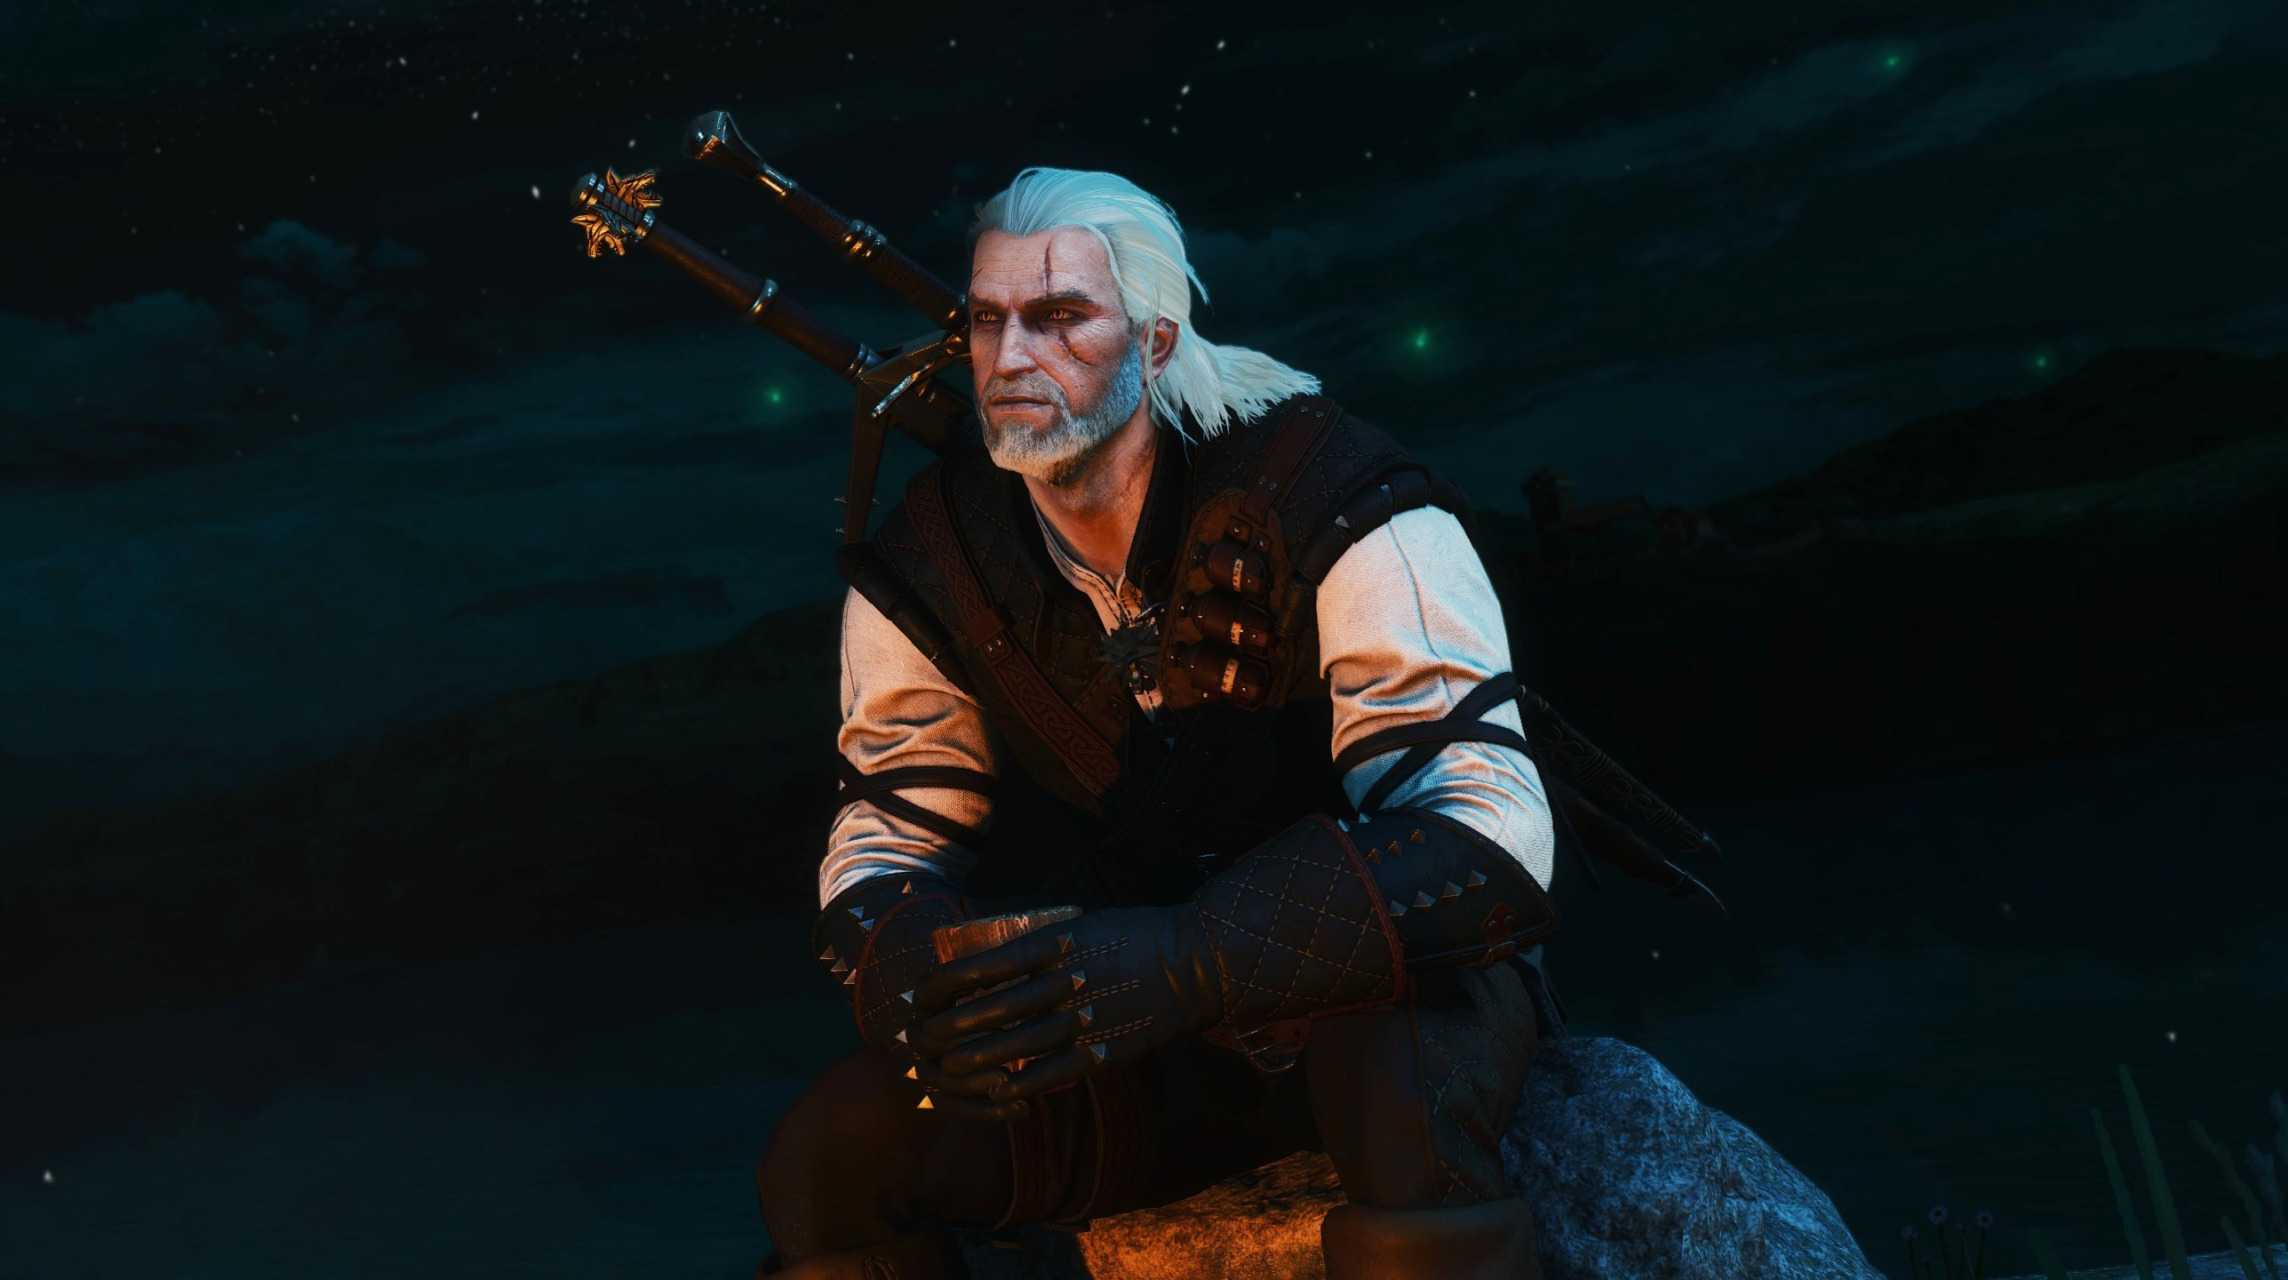 CD Projekt RED White Hair Orange Eyes The Witcher Video Game Characters Screen Shot Stars Night Gera 2288x1280